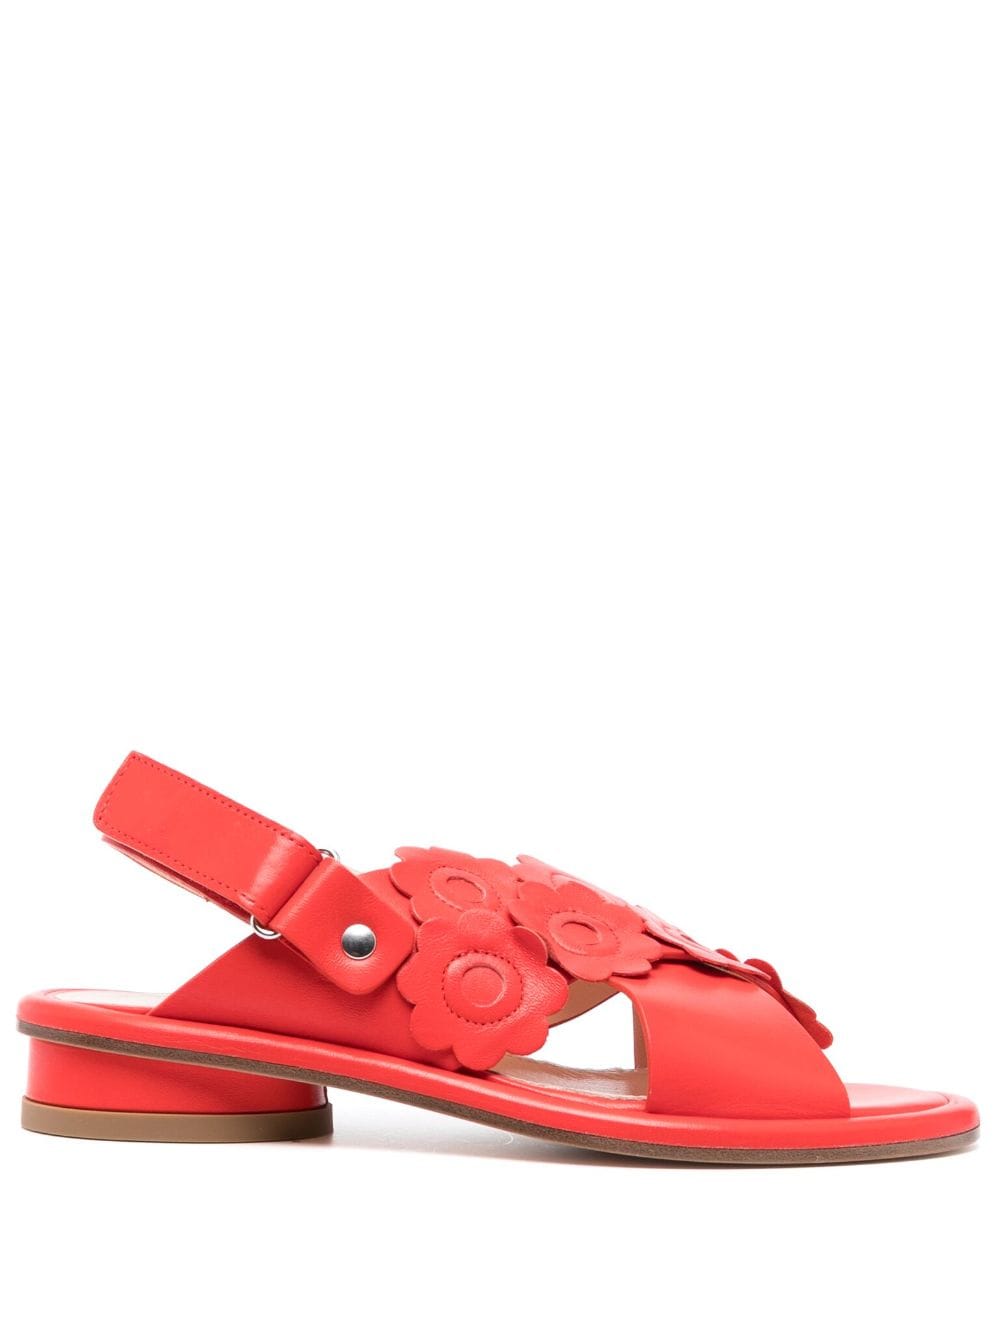 AGL Alison 35mm leather sandals - Red von AGL